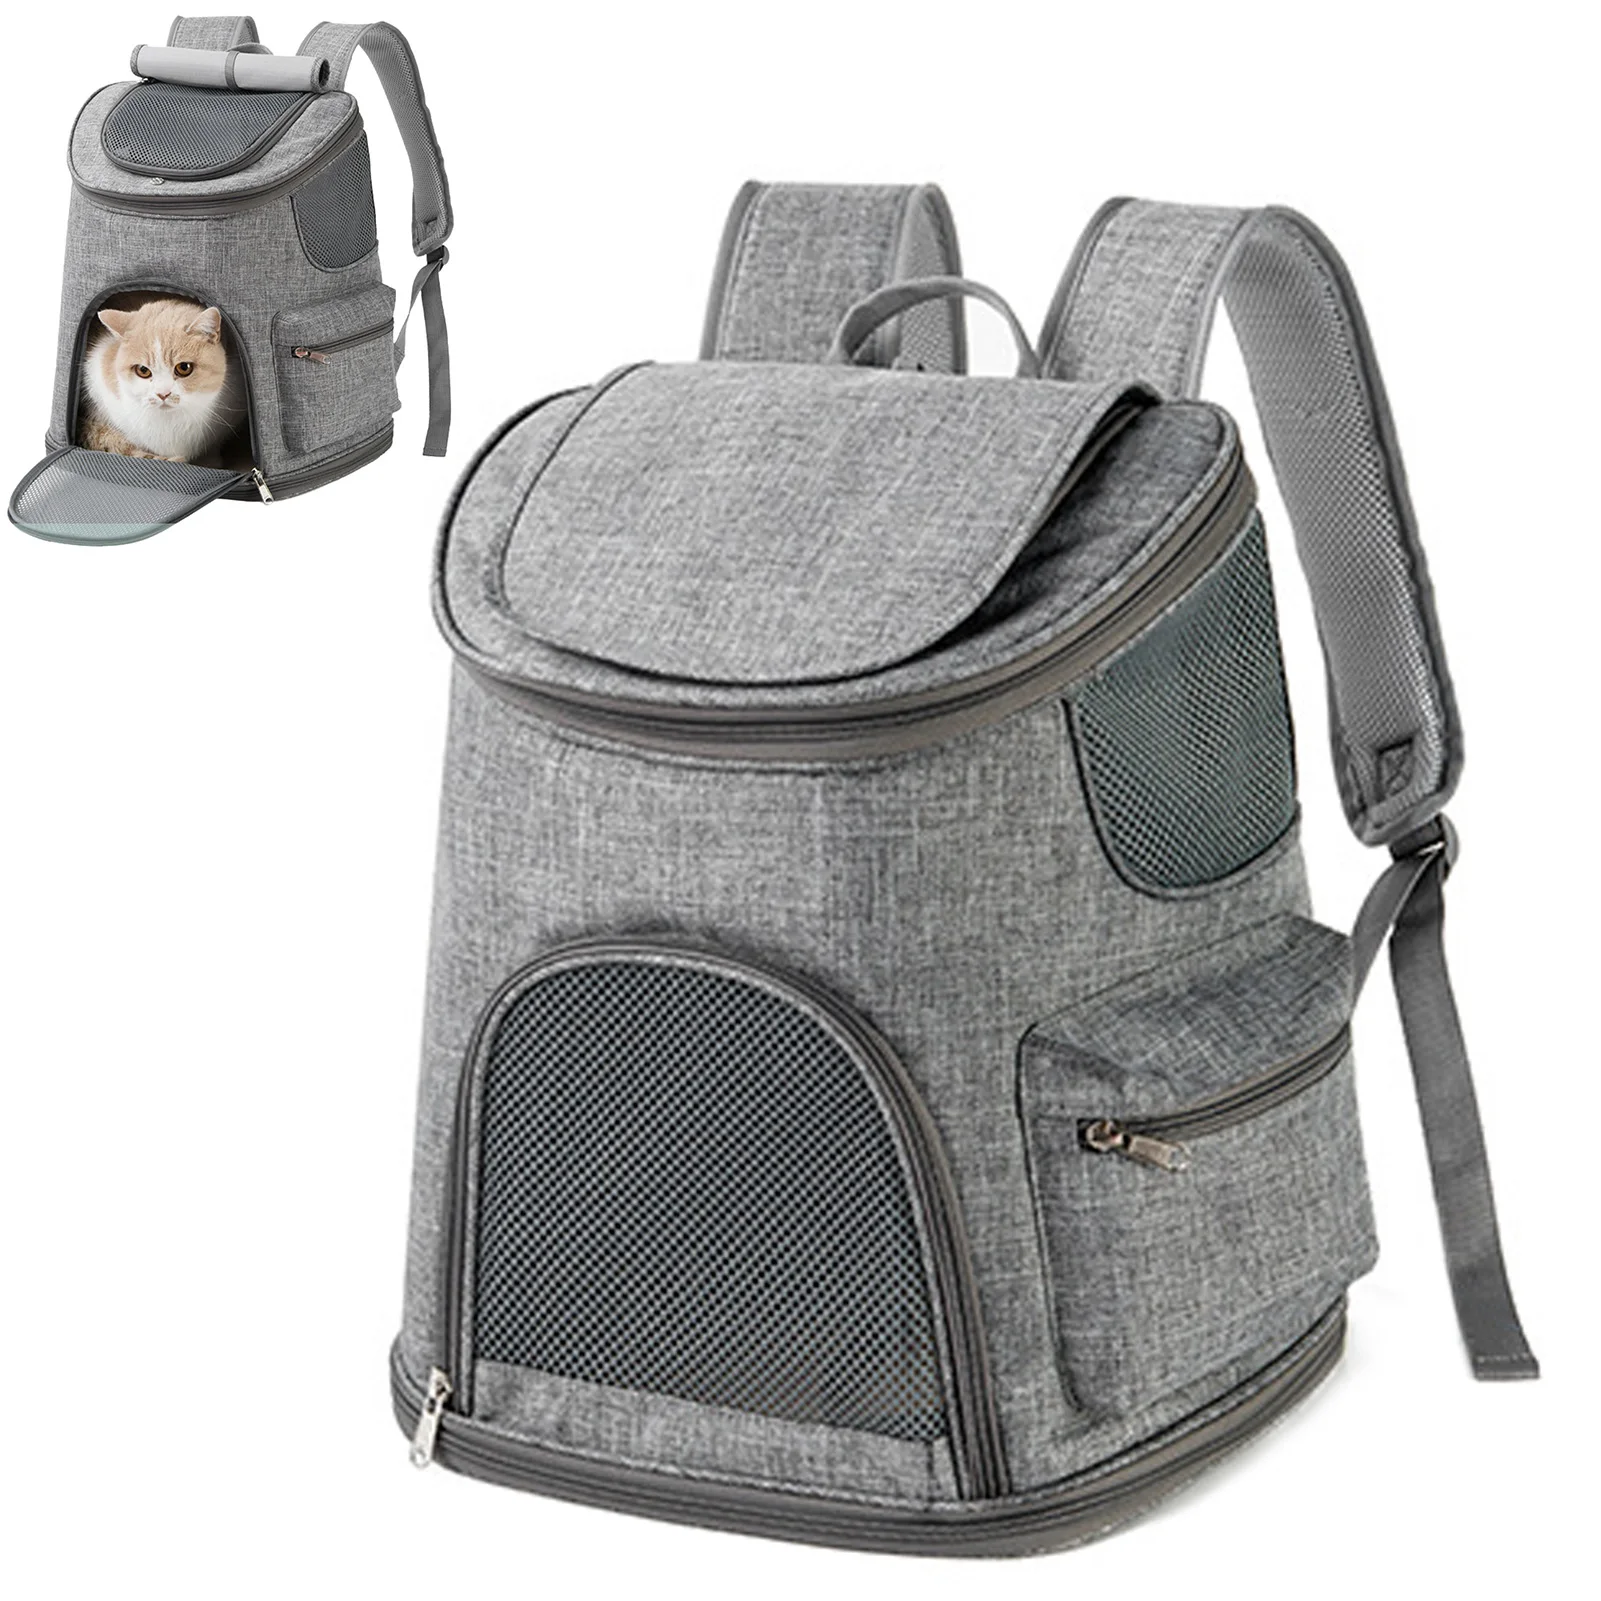 

Dog Carrier Backpack Foldable Portable Walker Bag Breathable Mesh Collapsible Travel Cat Box With Internal Safety Belt For Small